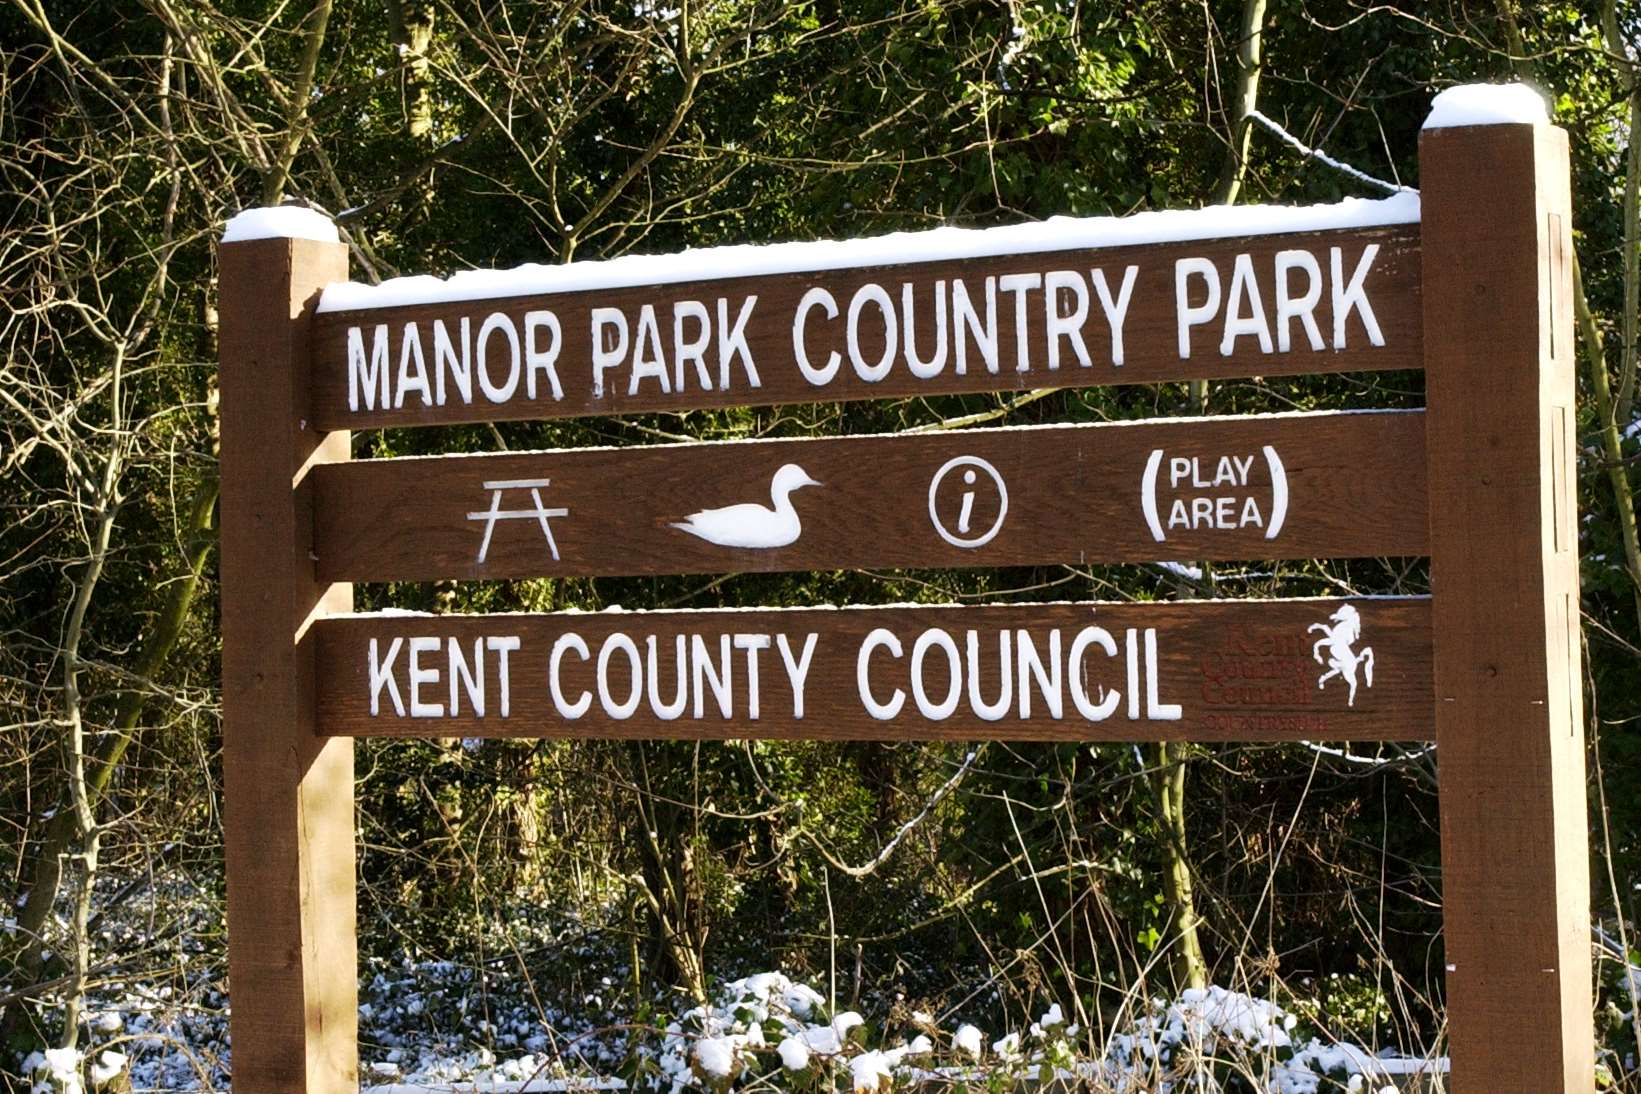 Manor Park opens daily - whatever the weather